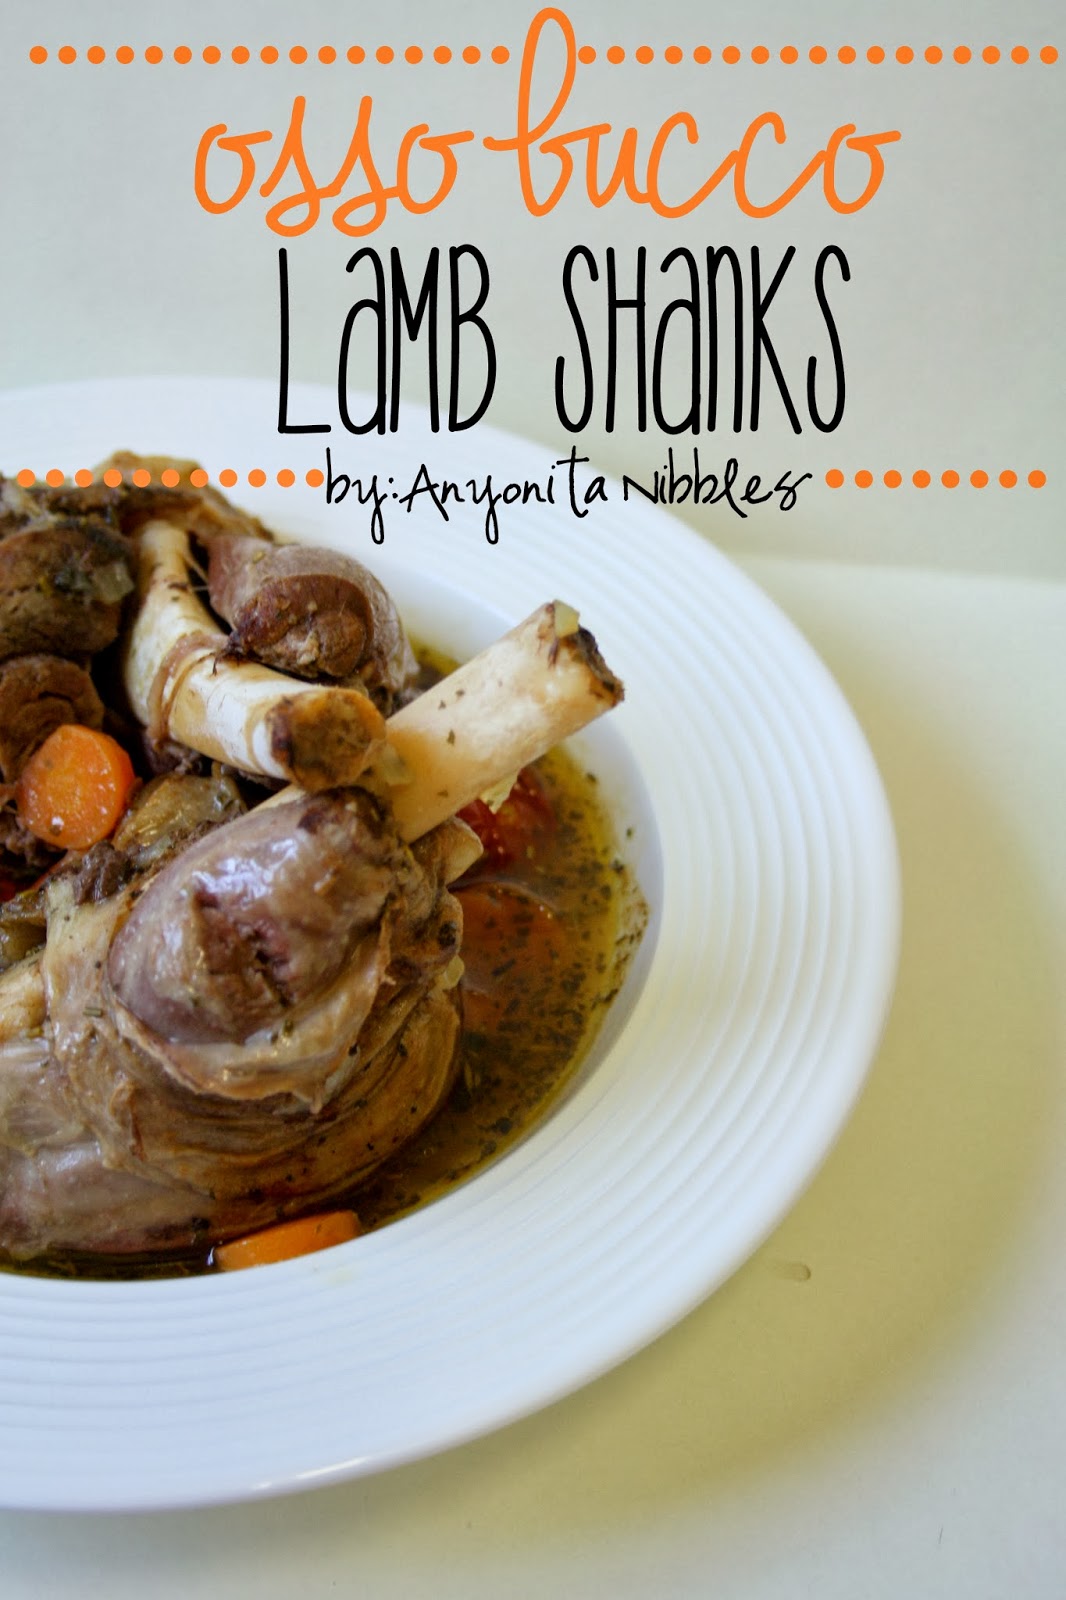 Osso Bucco Lamb Shanks Recipes made in the #crockpot for an easy but elegant #dinner